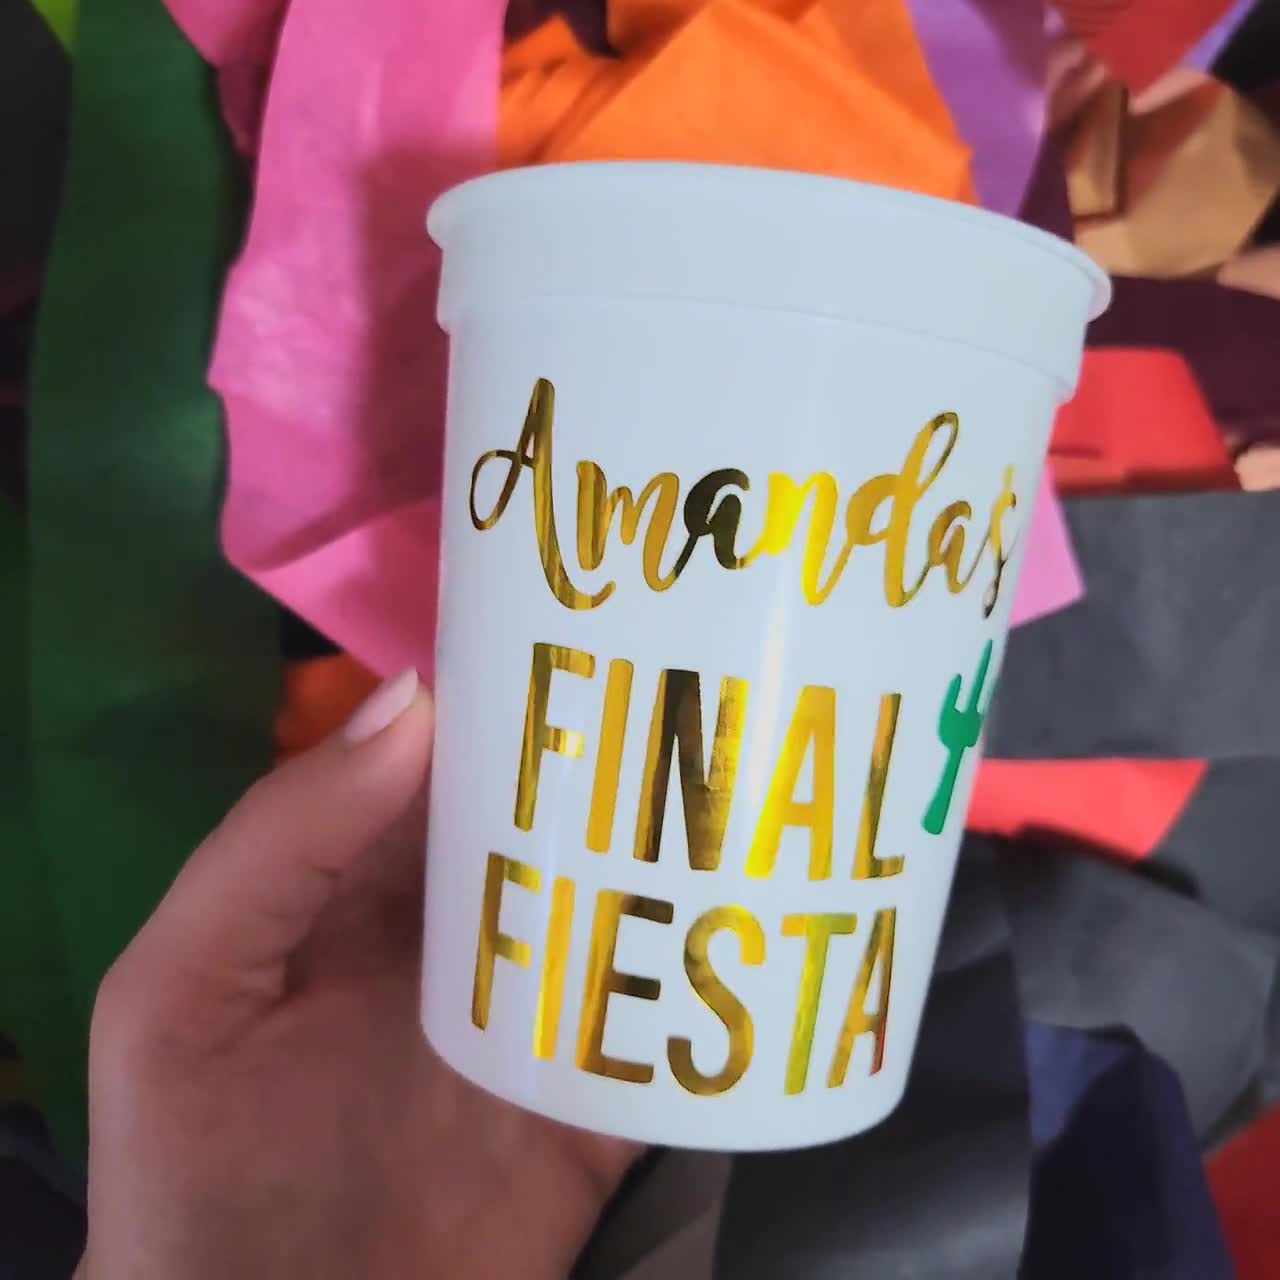 Final Fiesta Party Cups, Bachelorette Party Cups